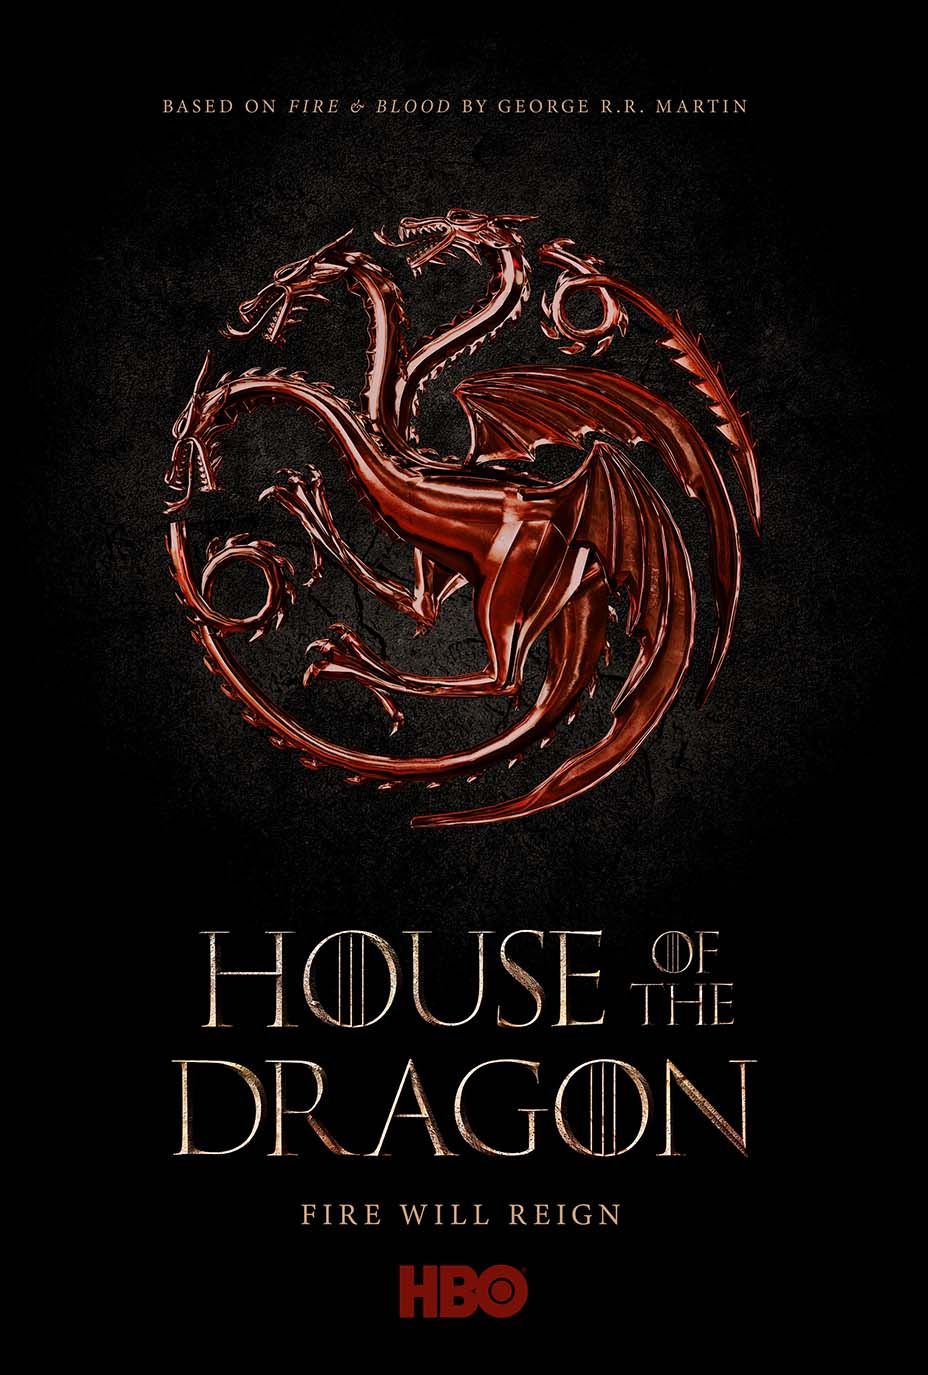 House Of The Dragon Episode 10 Finale FULL Breakdown and Game Of Thrones  Easter Eggs 